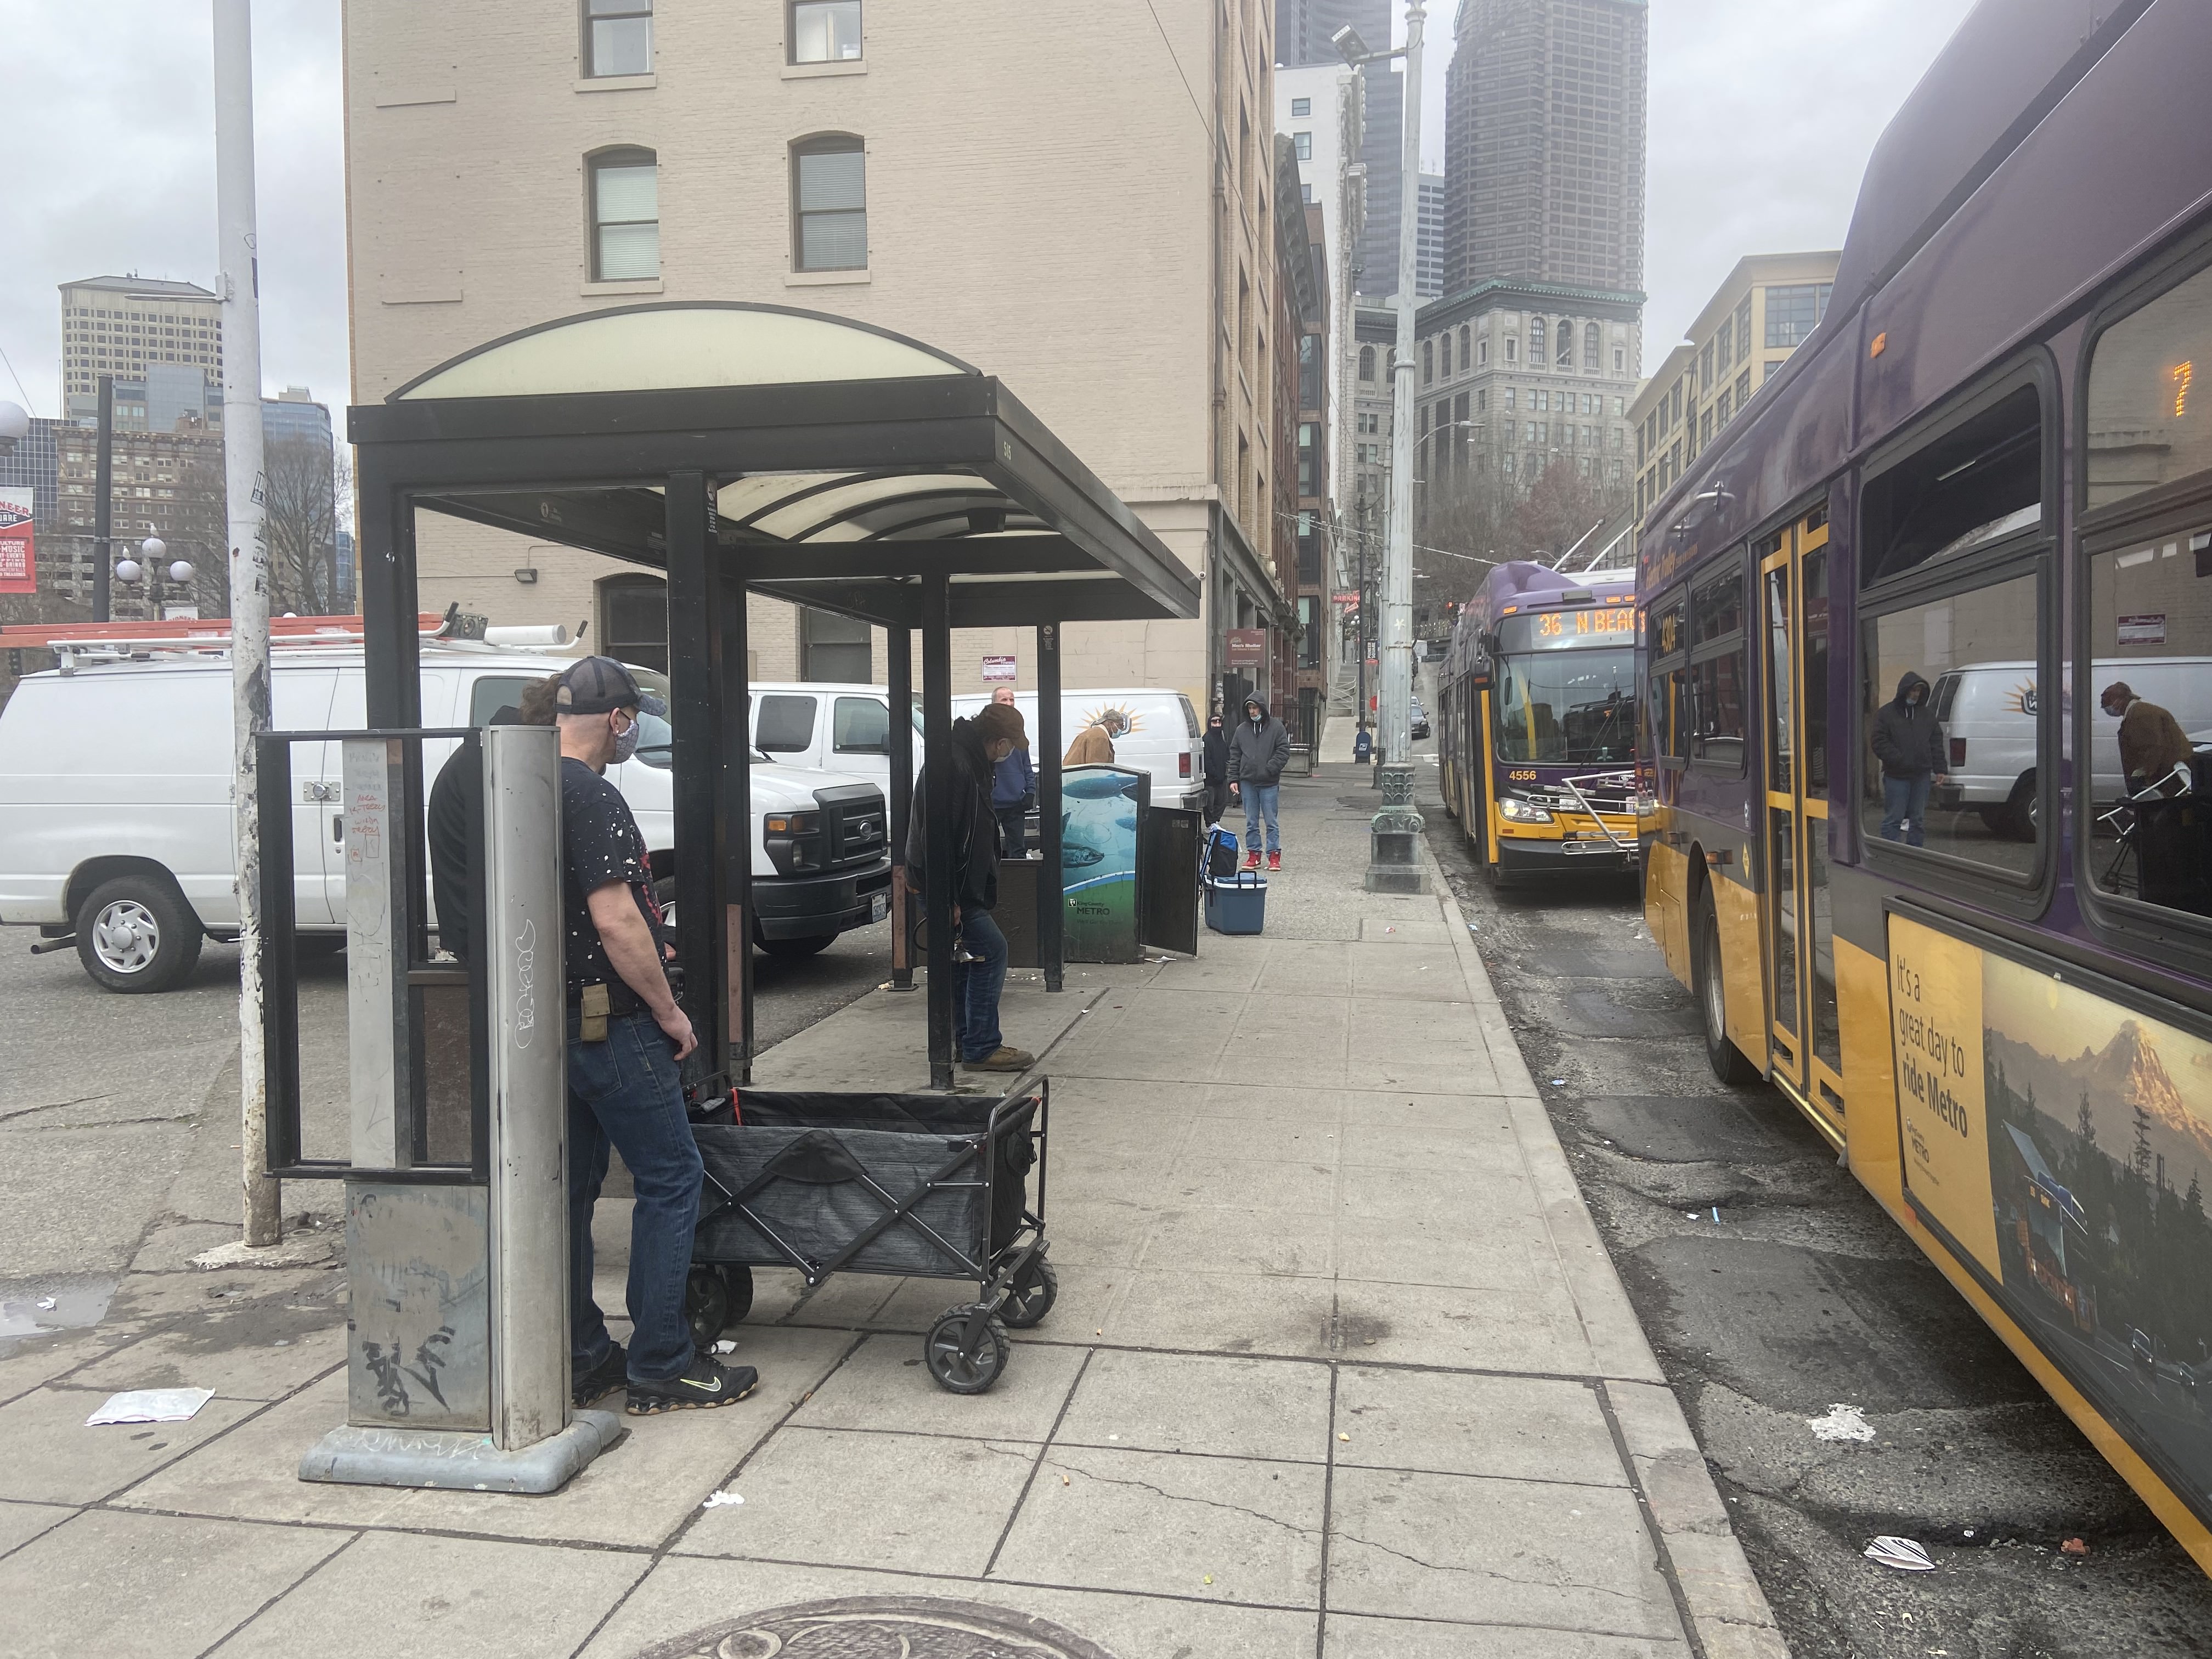 A photo taken looking down 3rd at the existing bus stop shelter with a bus at the curb.